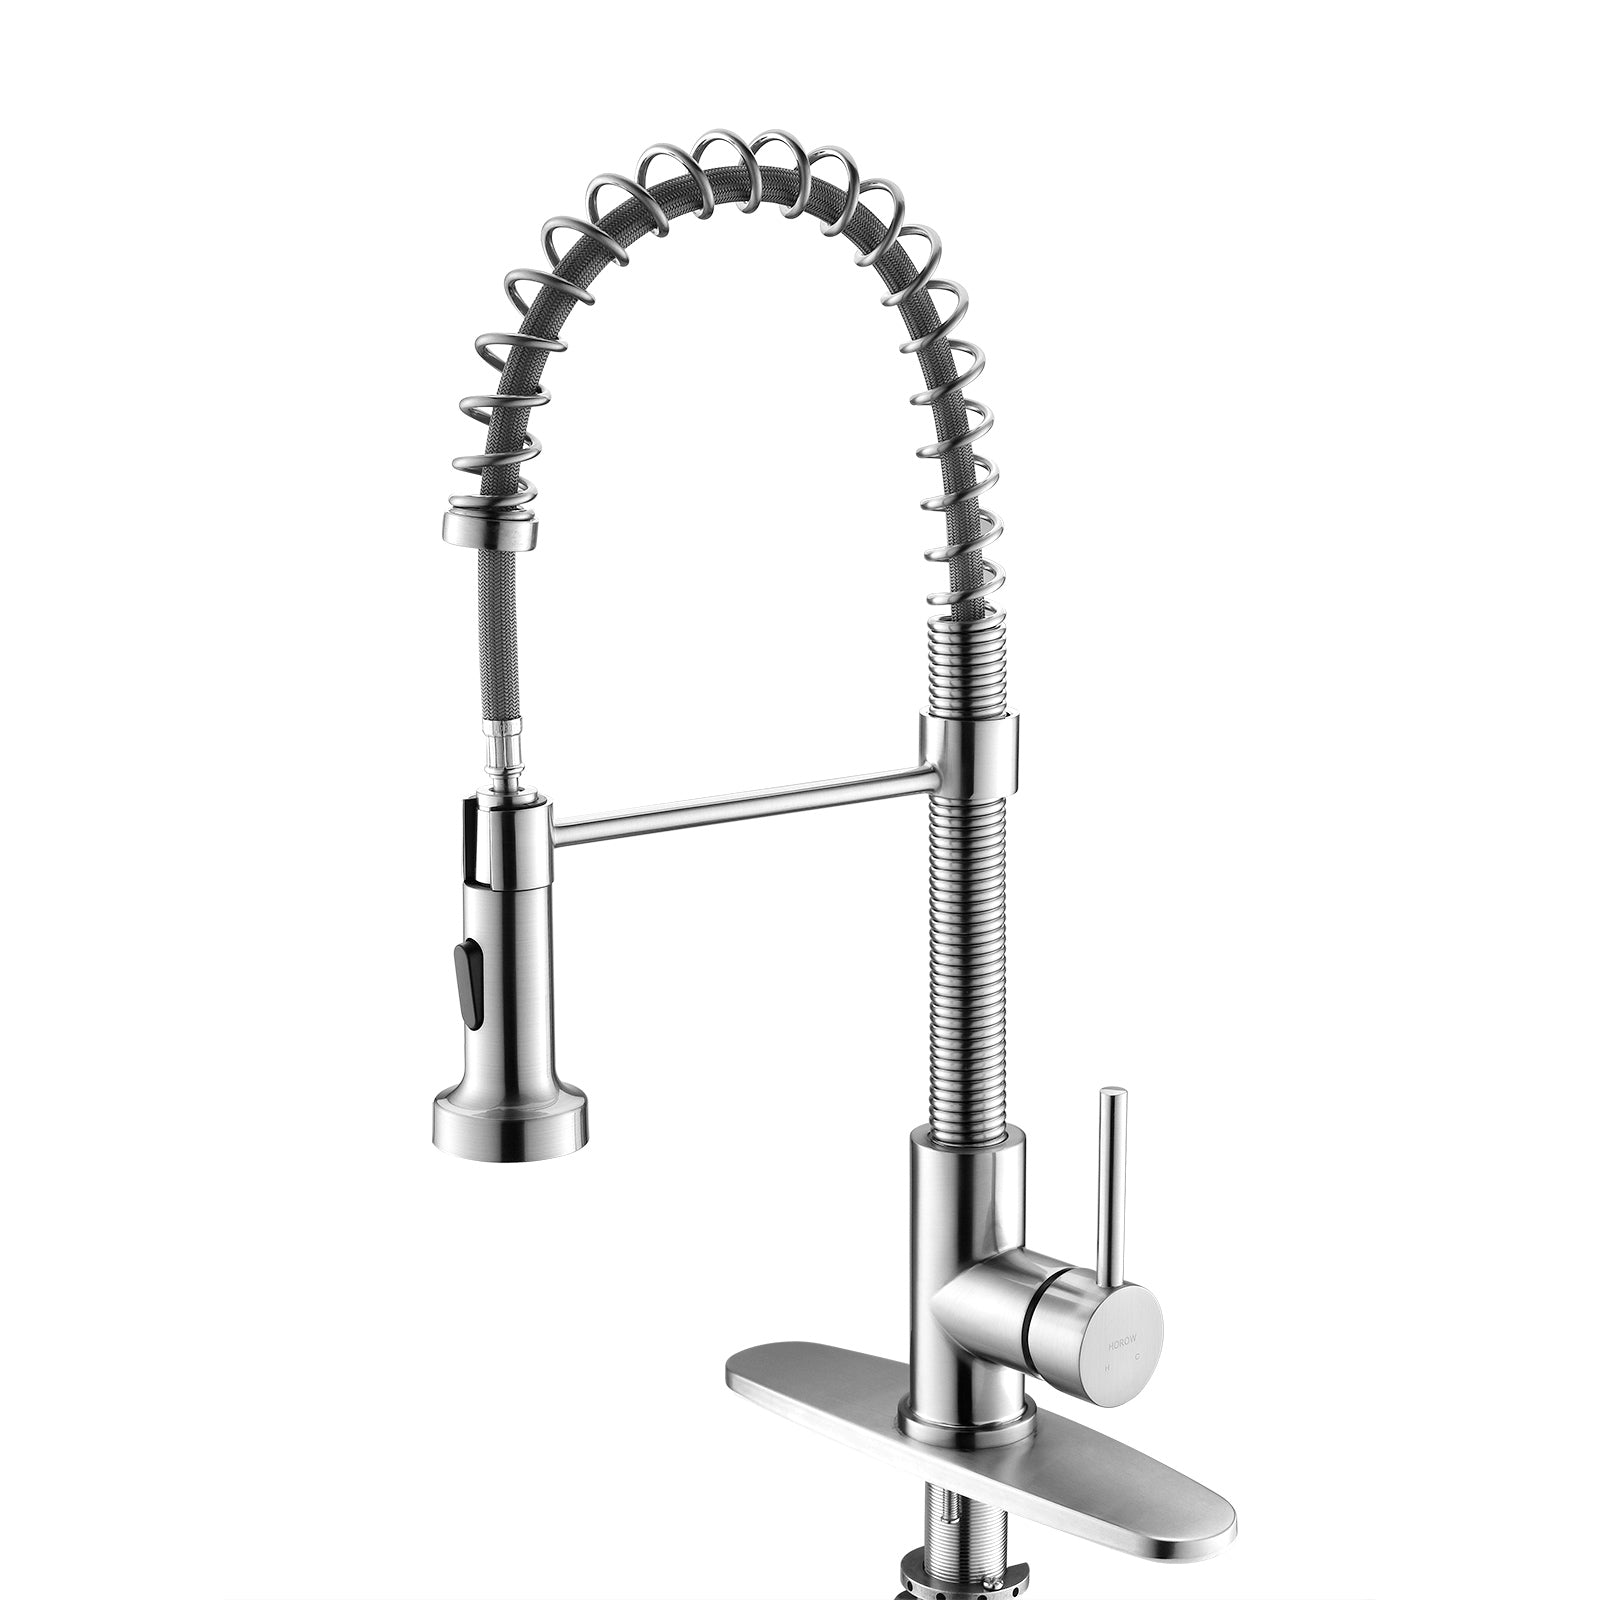 HOROW Best Kitchen Faucet With Pull Down Sprayer Model HR-KF0229B